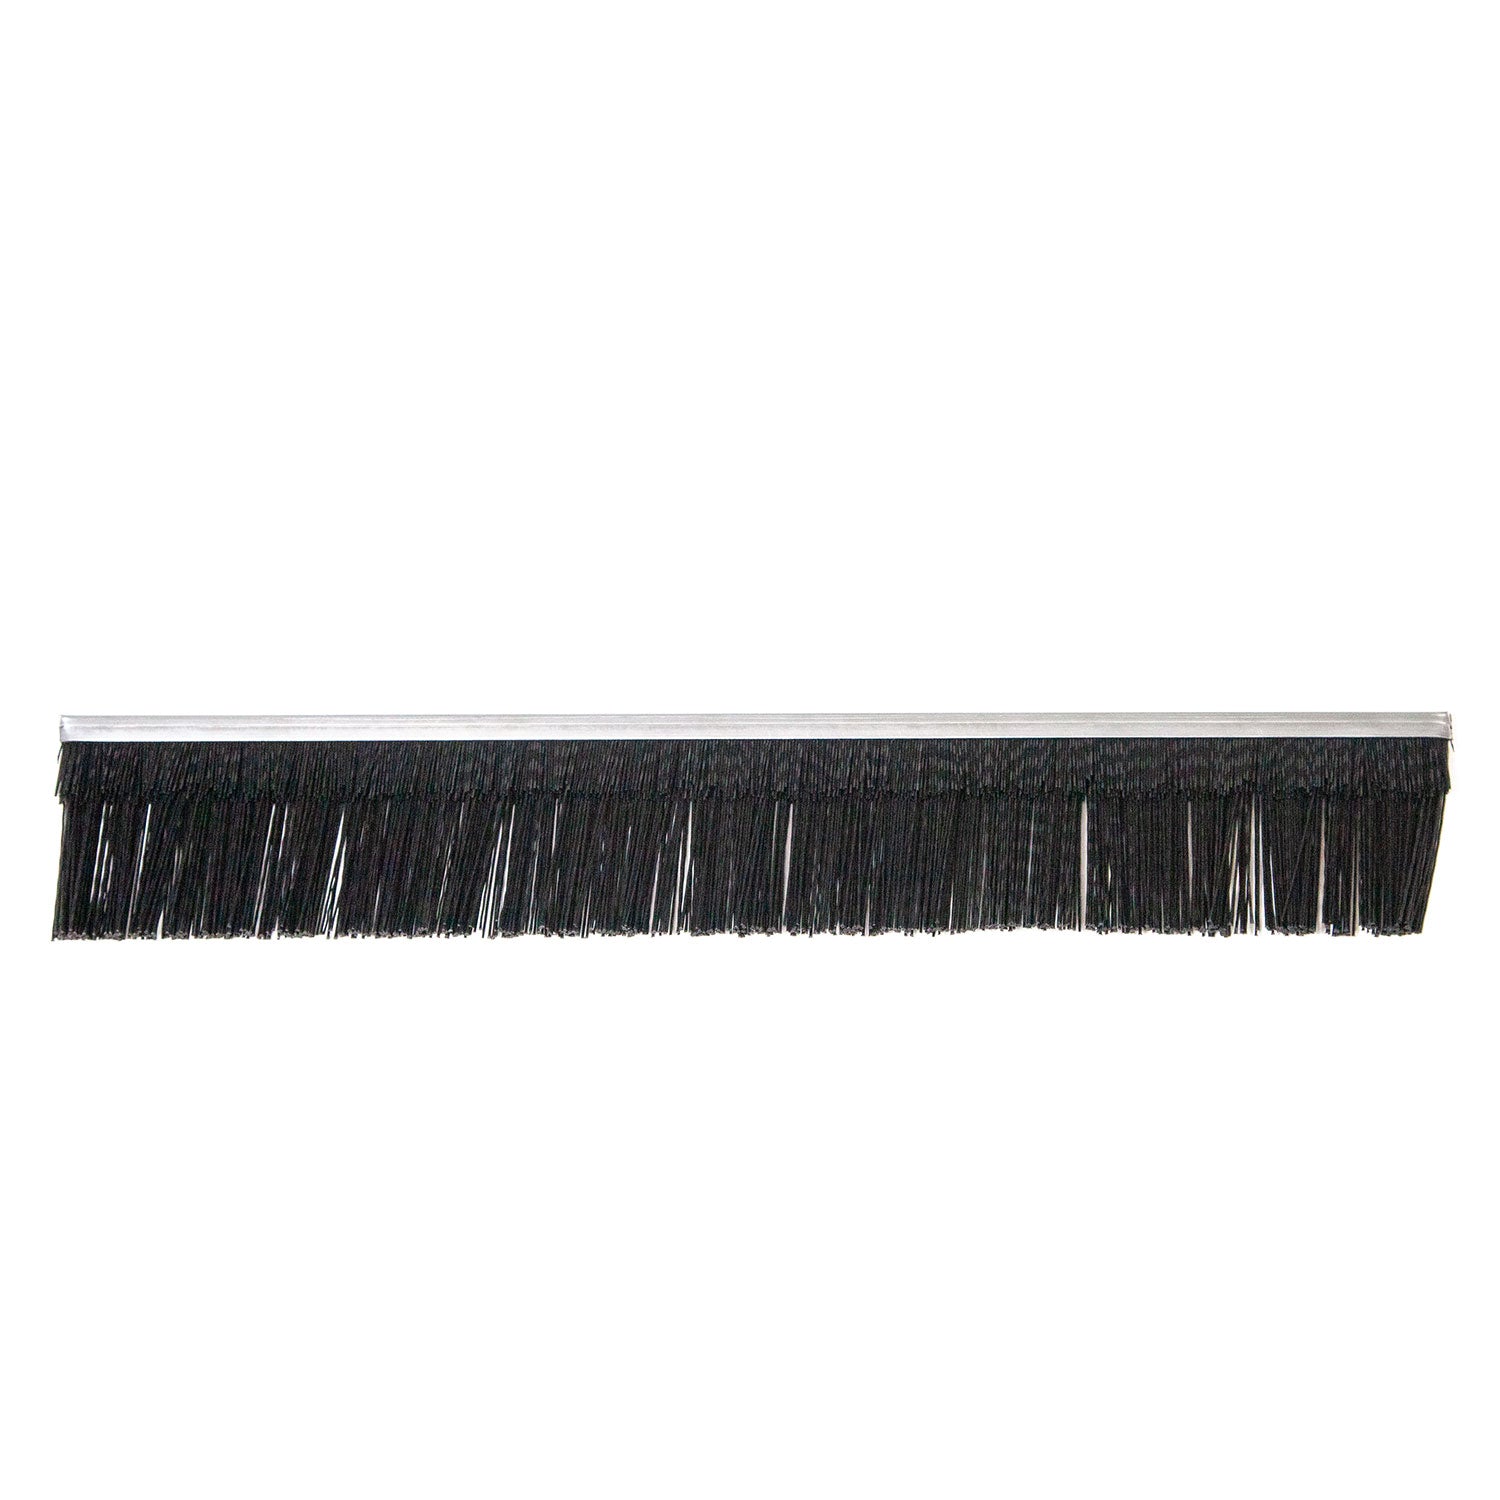 Brush Research 10SJD Ring Groove Brush, 5 1/2 Inches